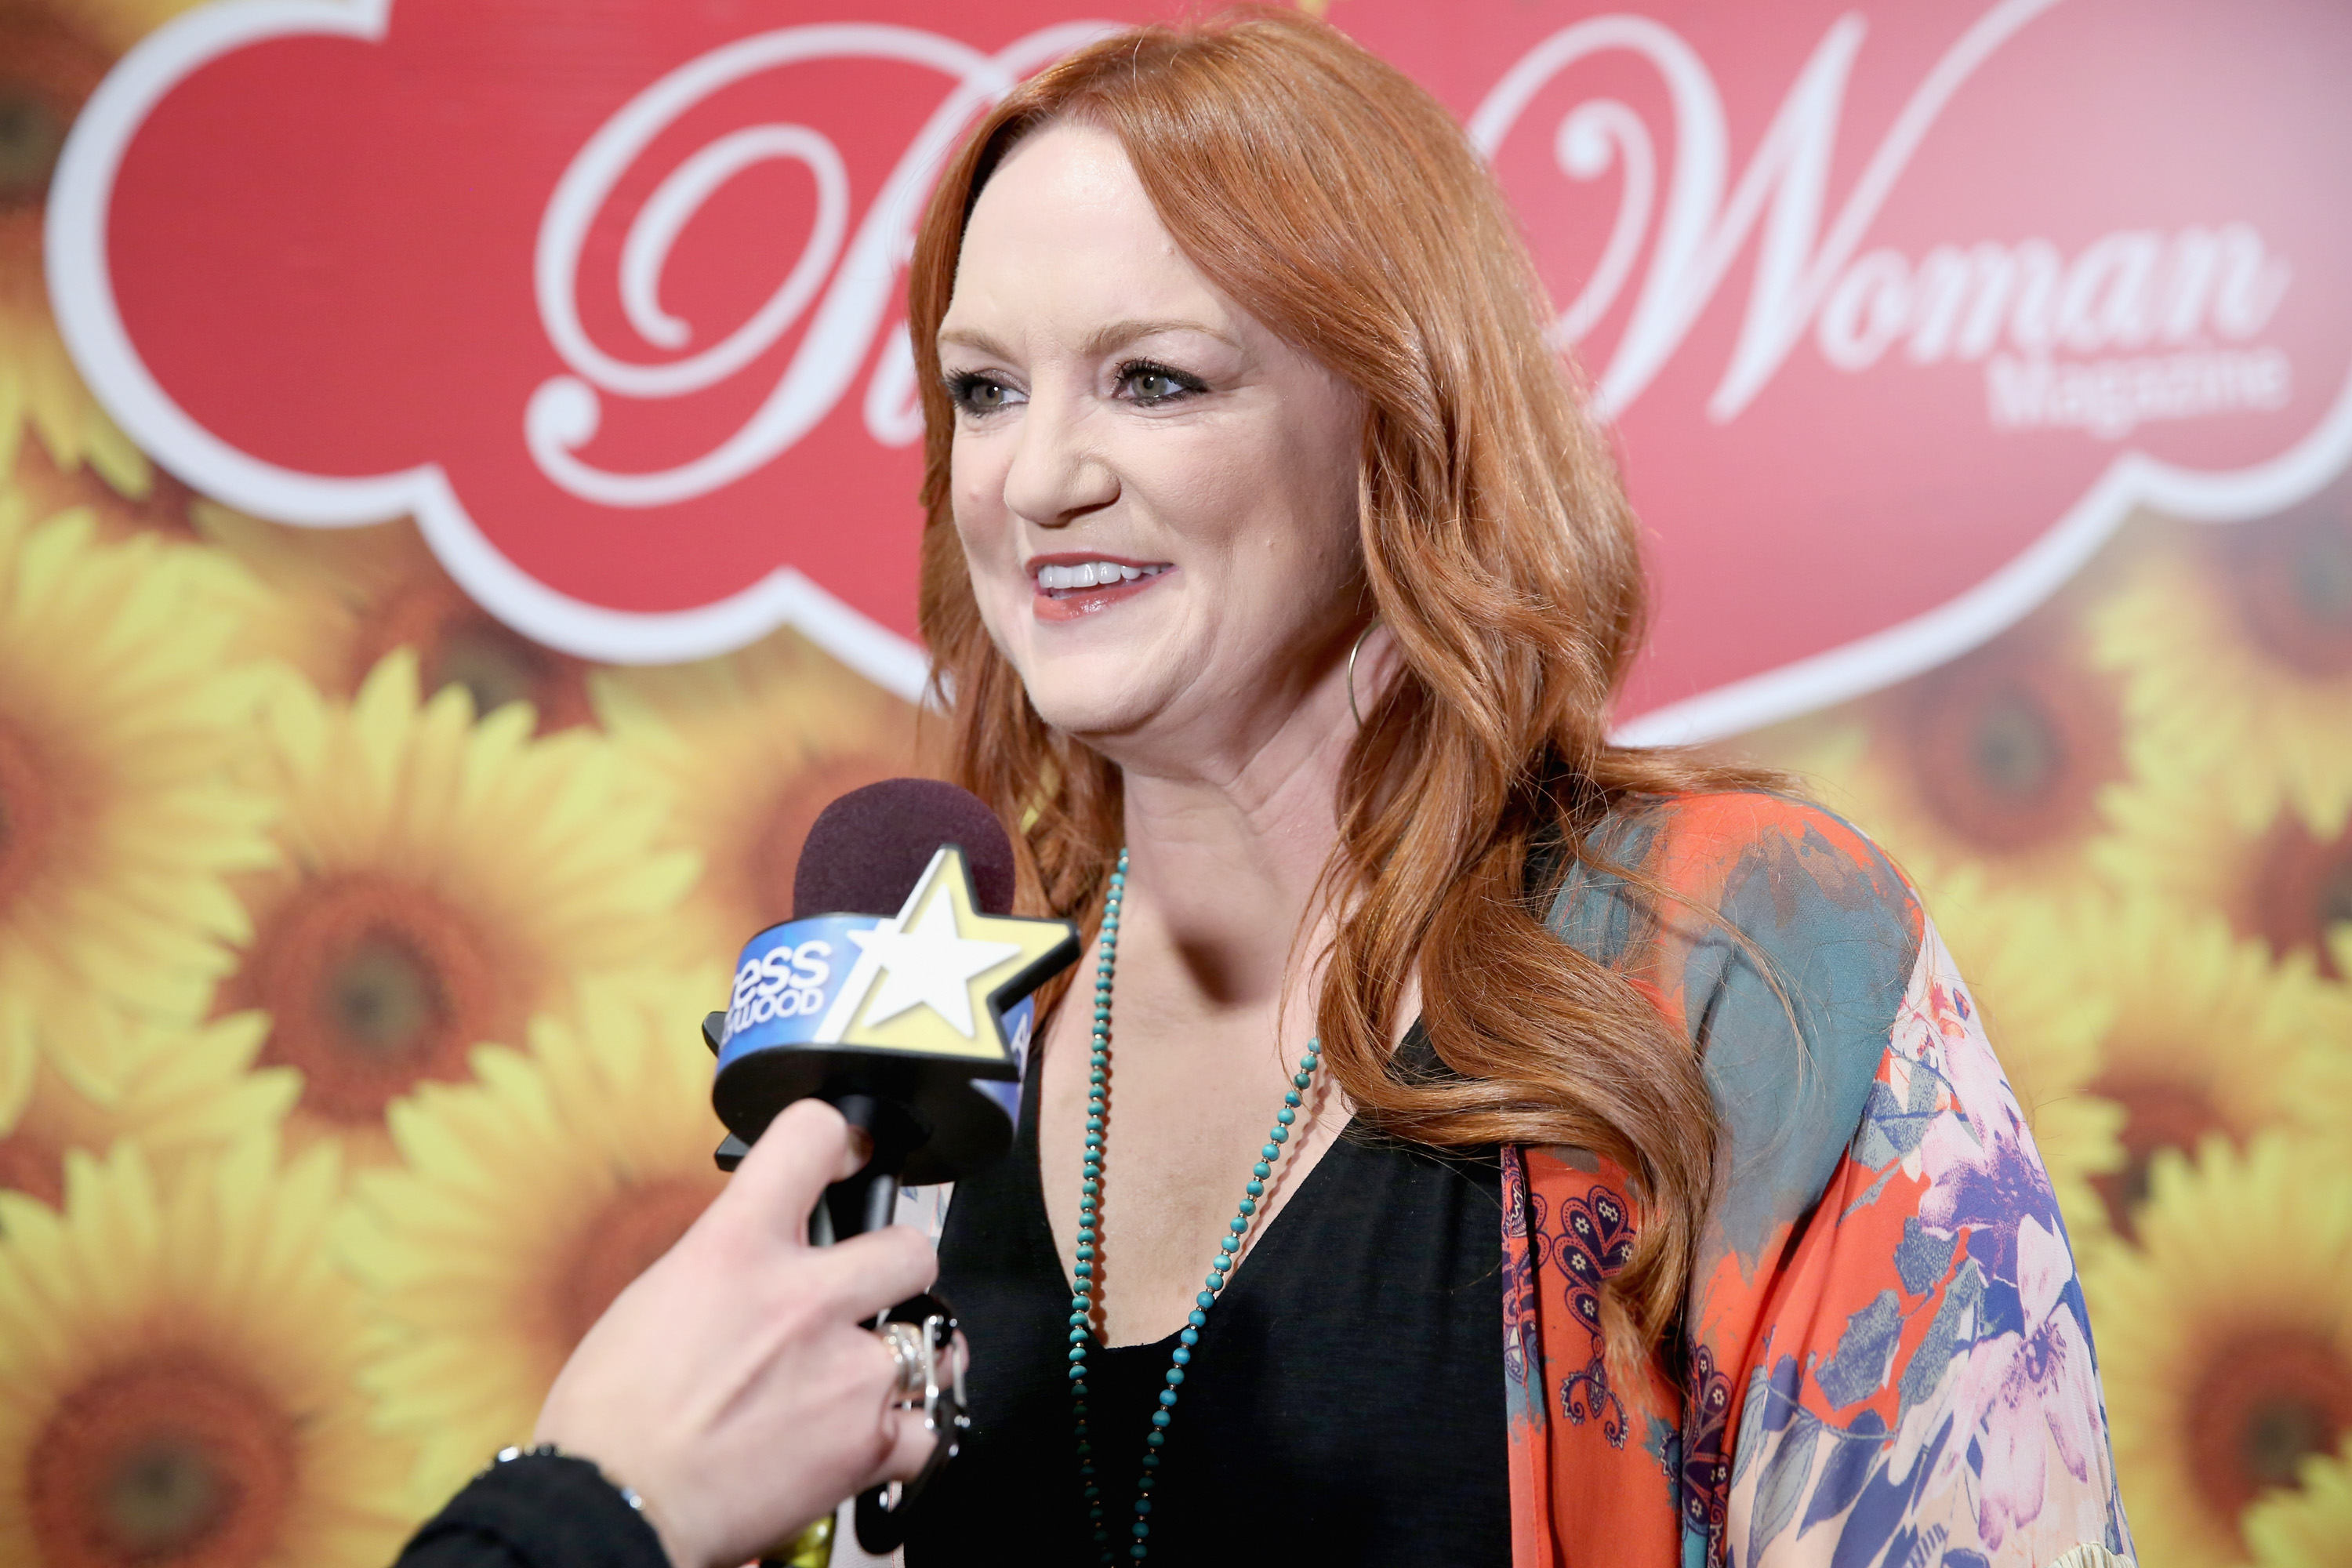 Ree Drummond speaks into a microphone as she's interviewed during an event for The Pioneer Woman Magazine